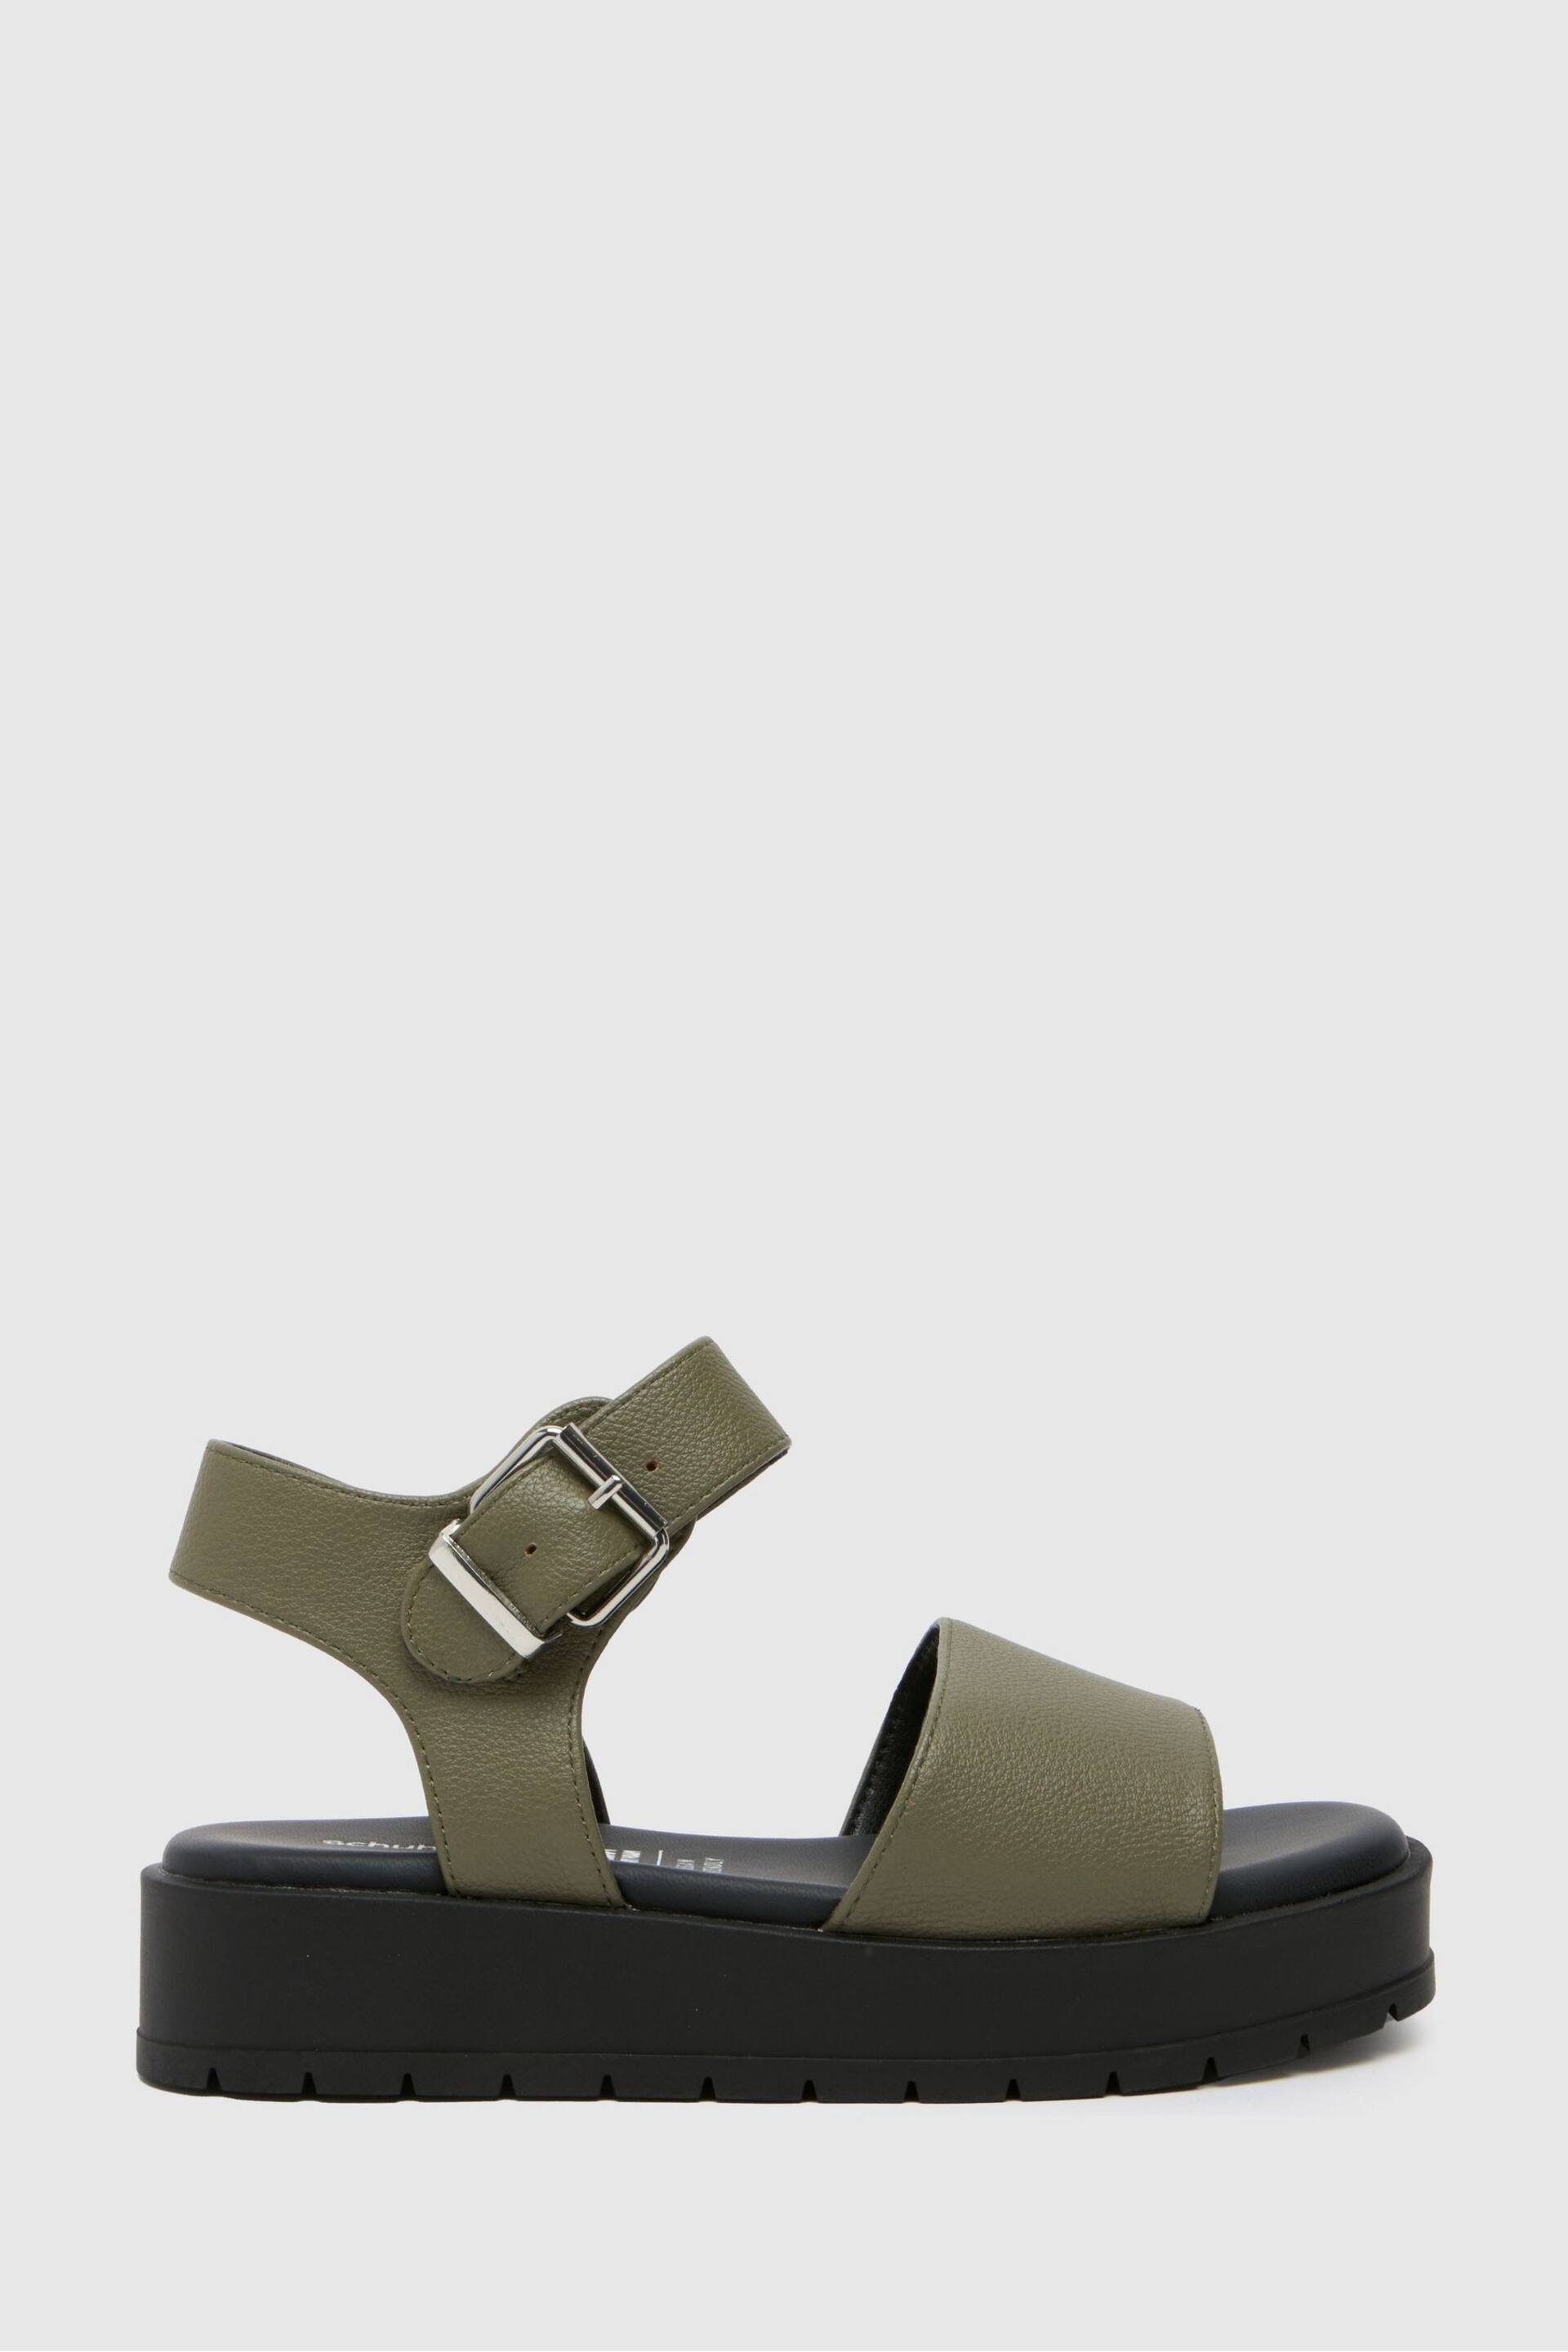 Schuh Green Trixie Chunky Sandals - Image 1 of 4